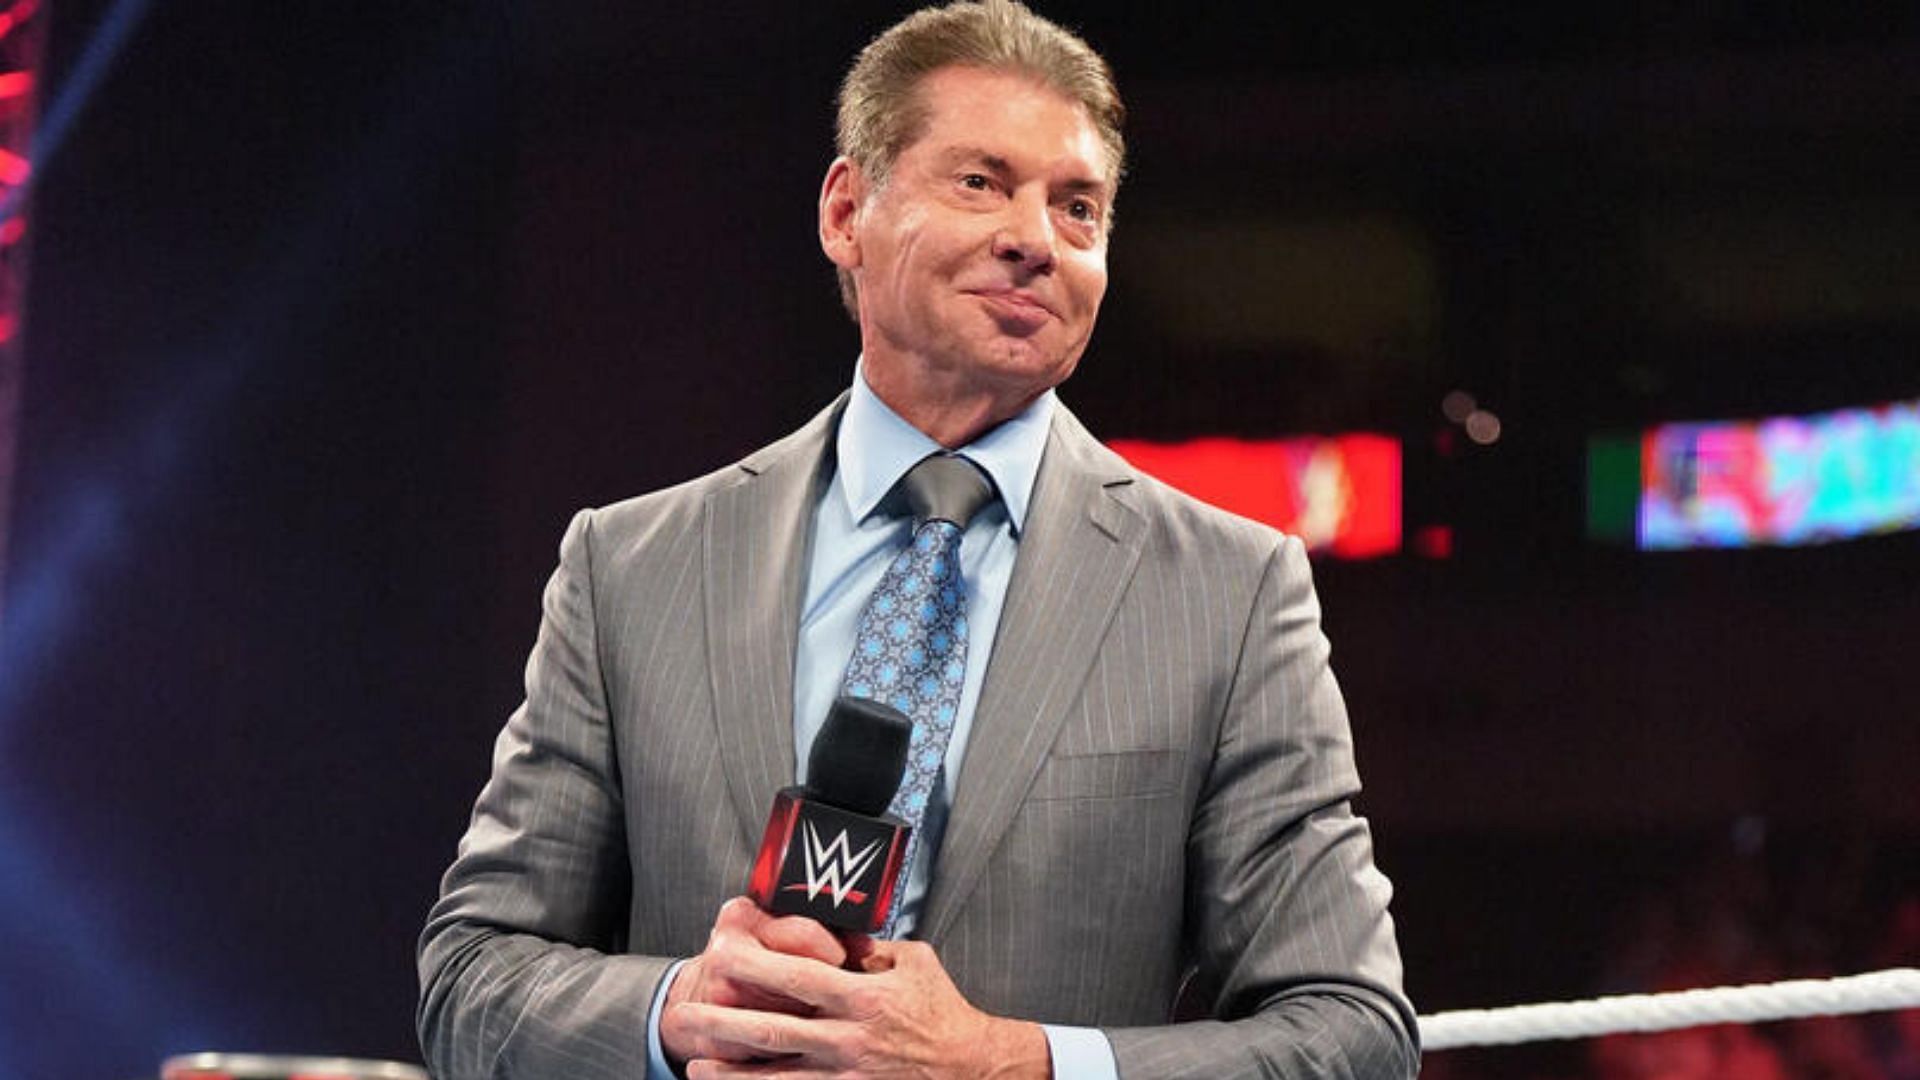 McMahon resigned from the company following a lawsuit against him.